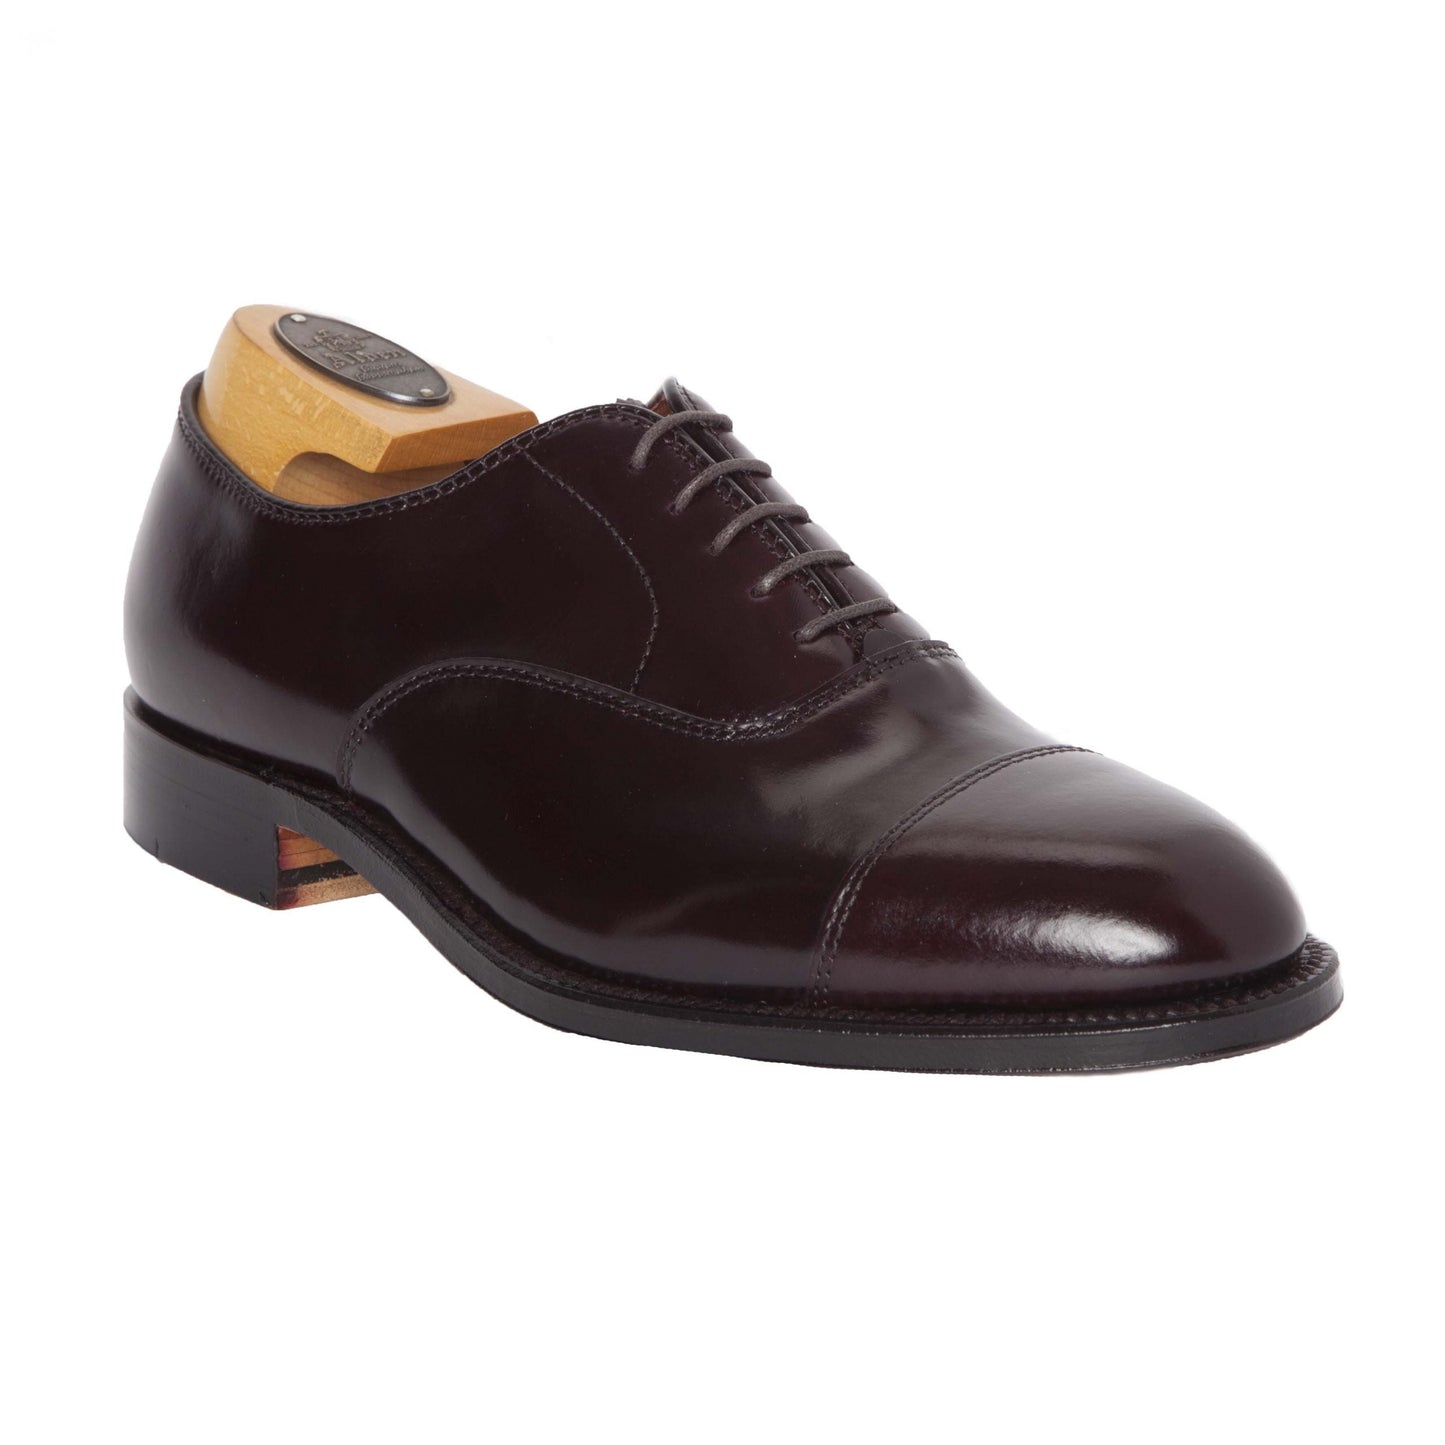 9070 - Straight Tip Bal in Color 8 Shell Cordovan